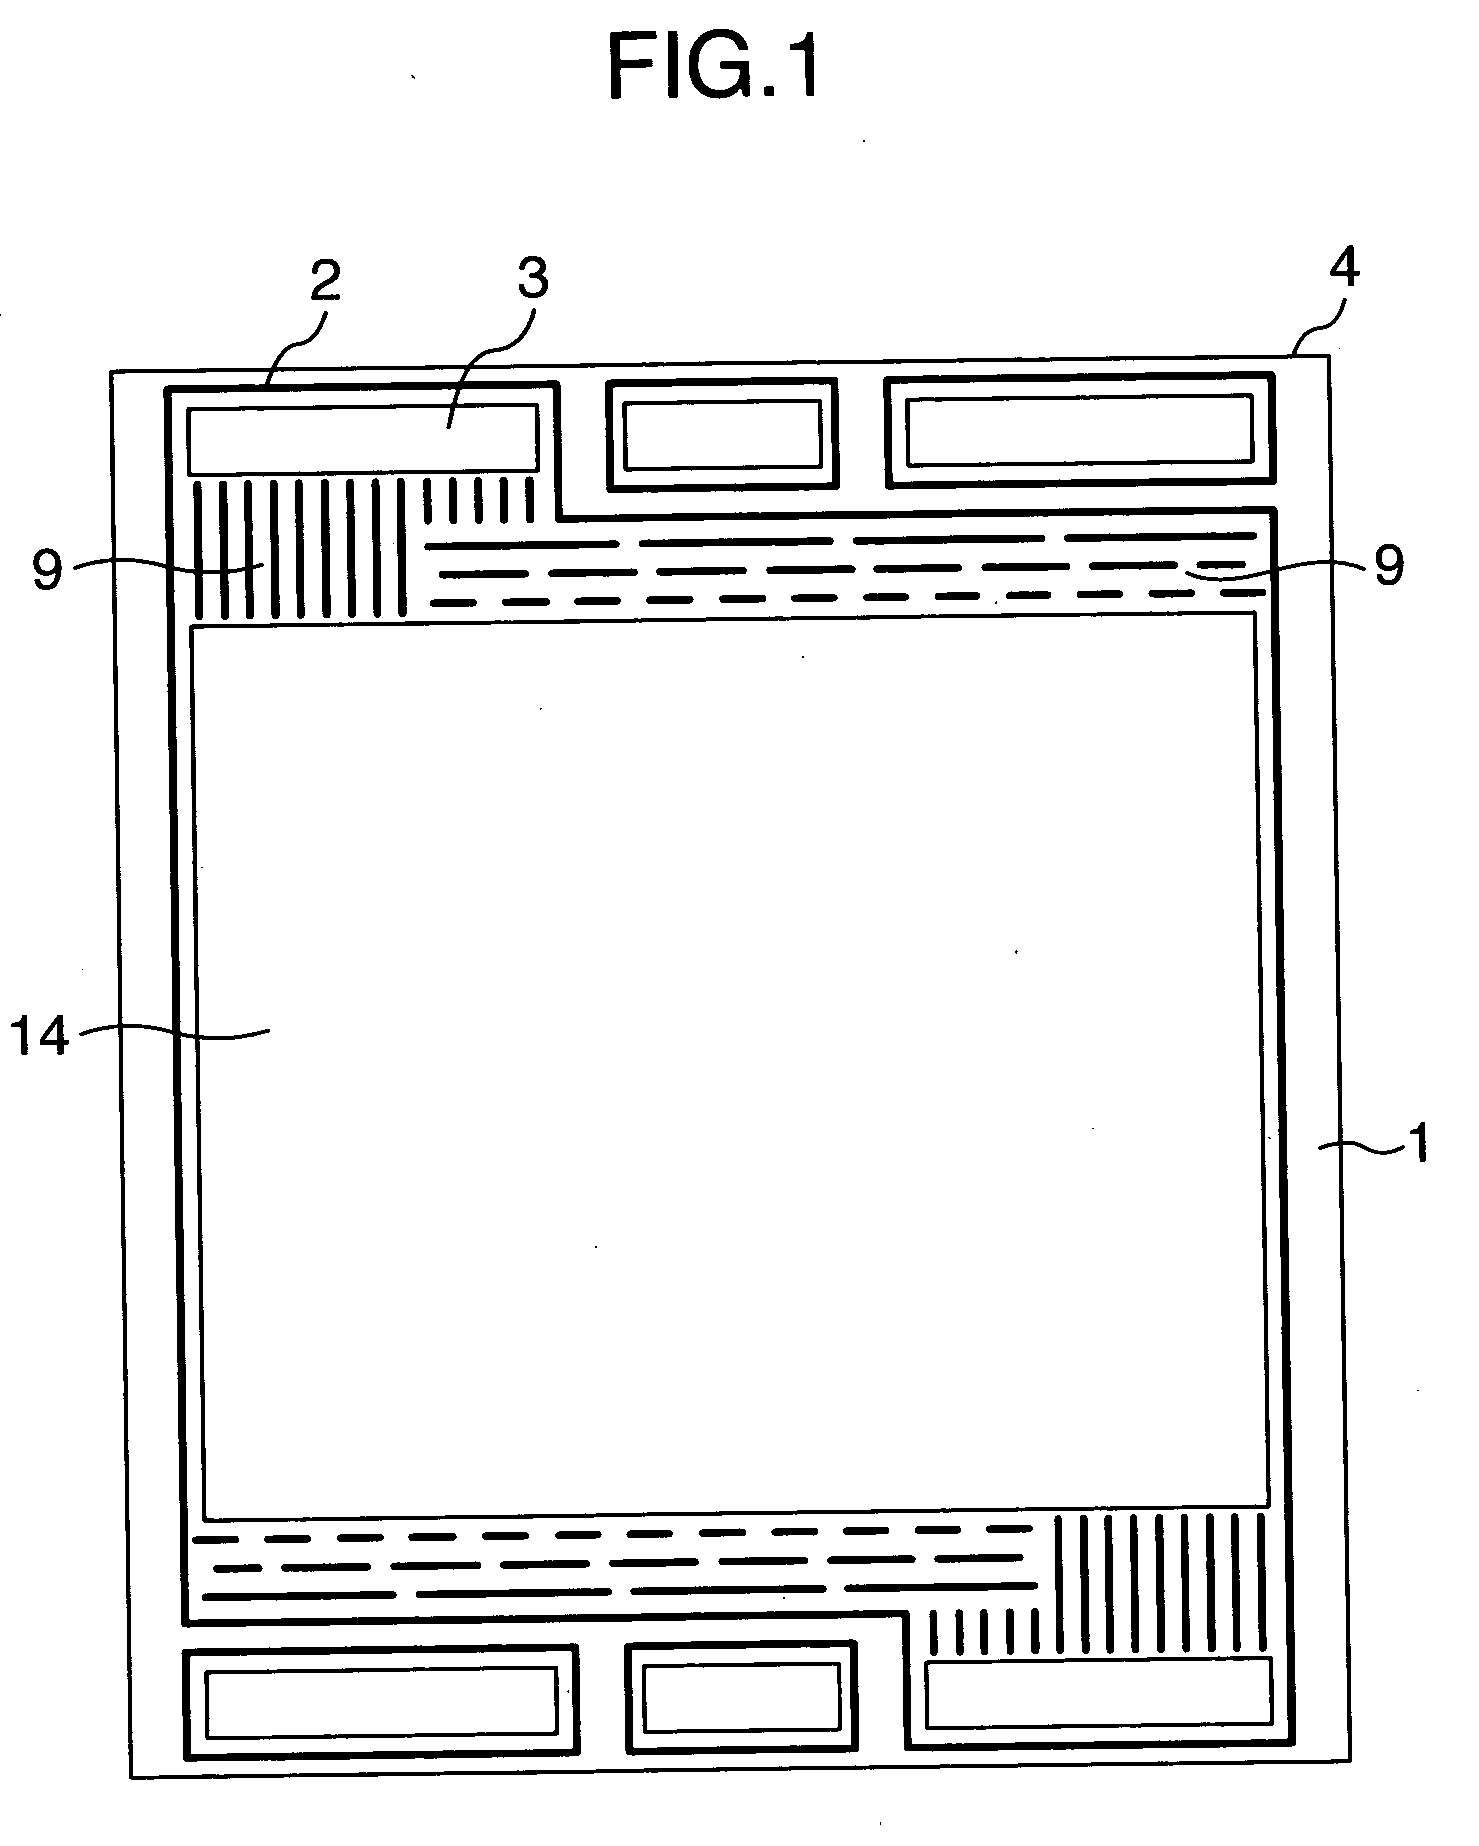 Separator for fuel cell and fuel cell using it